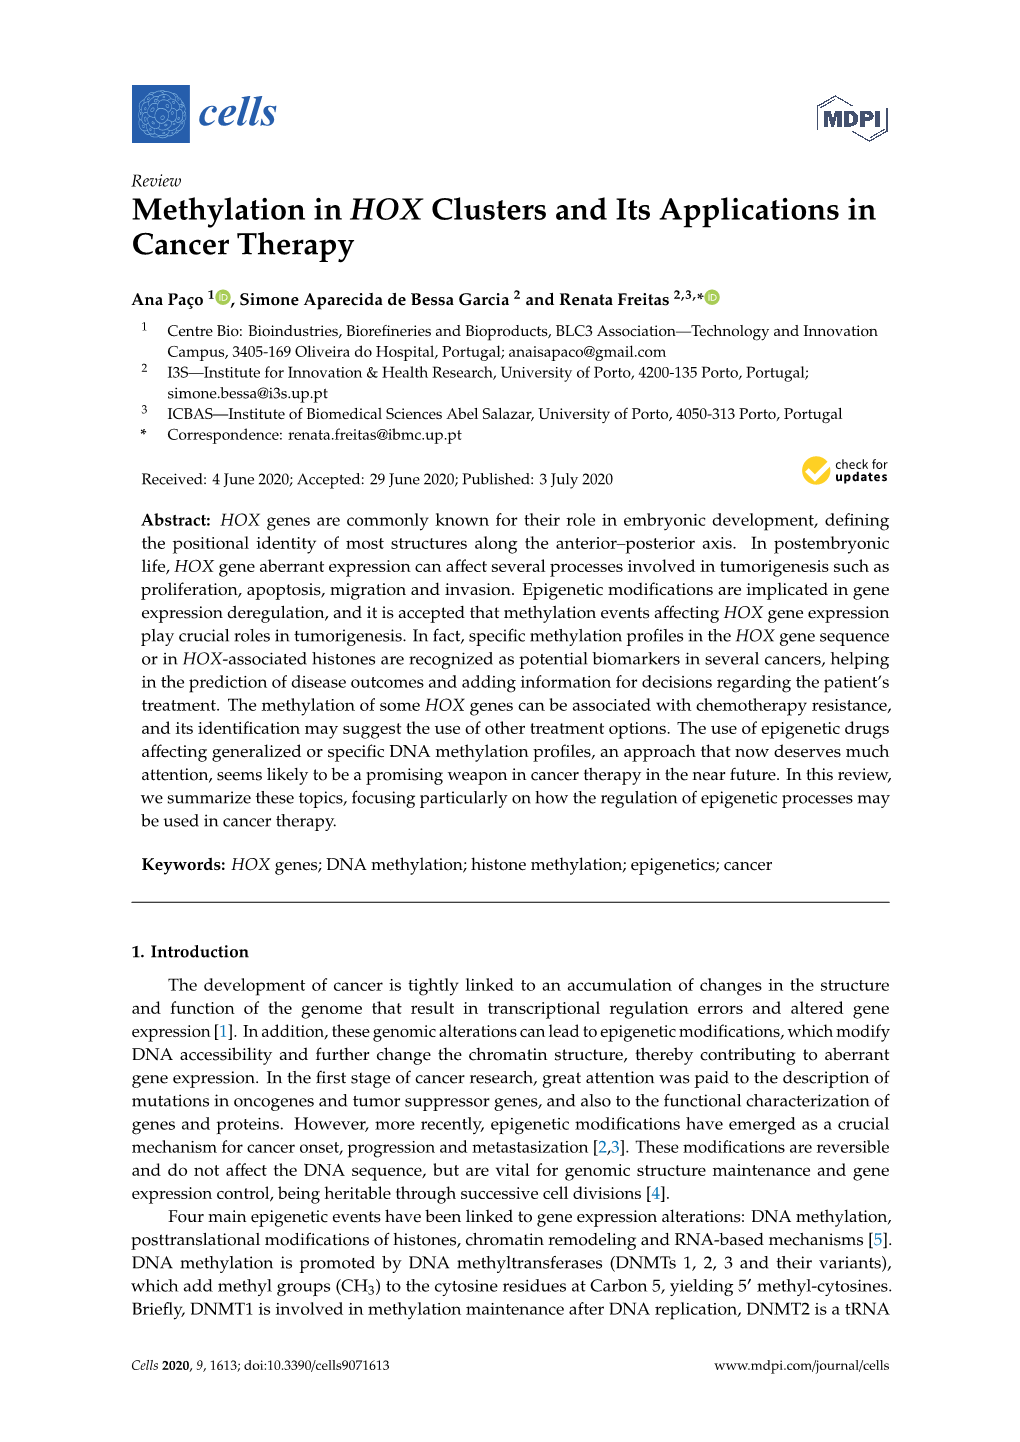 Methylation in HOX Clusters and Its Applications in Cancer Therapy